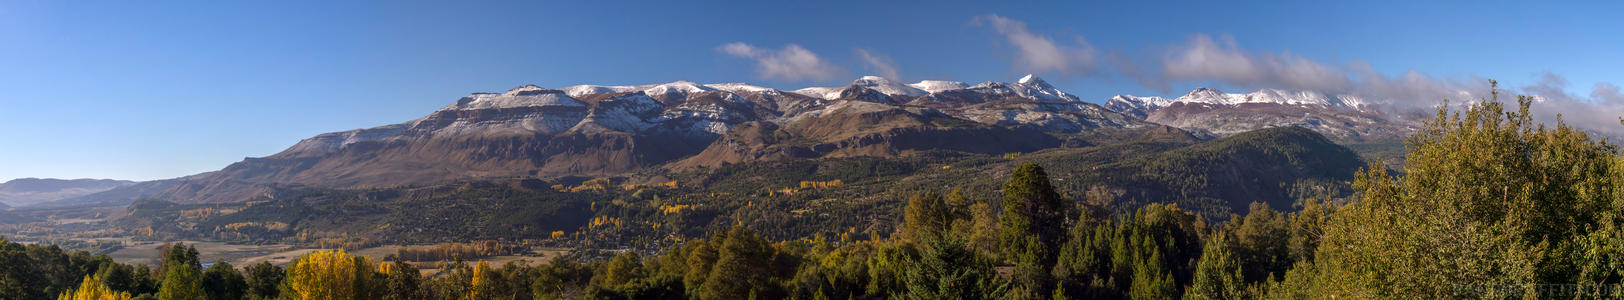 Mountains Along Ruta 62 - A snow covered range of mountains along route 62 in the Neuquen region